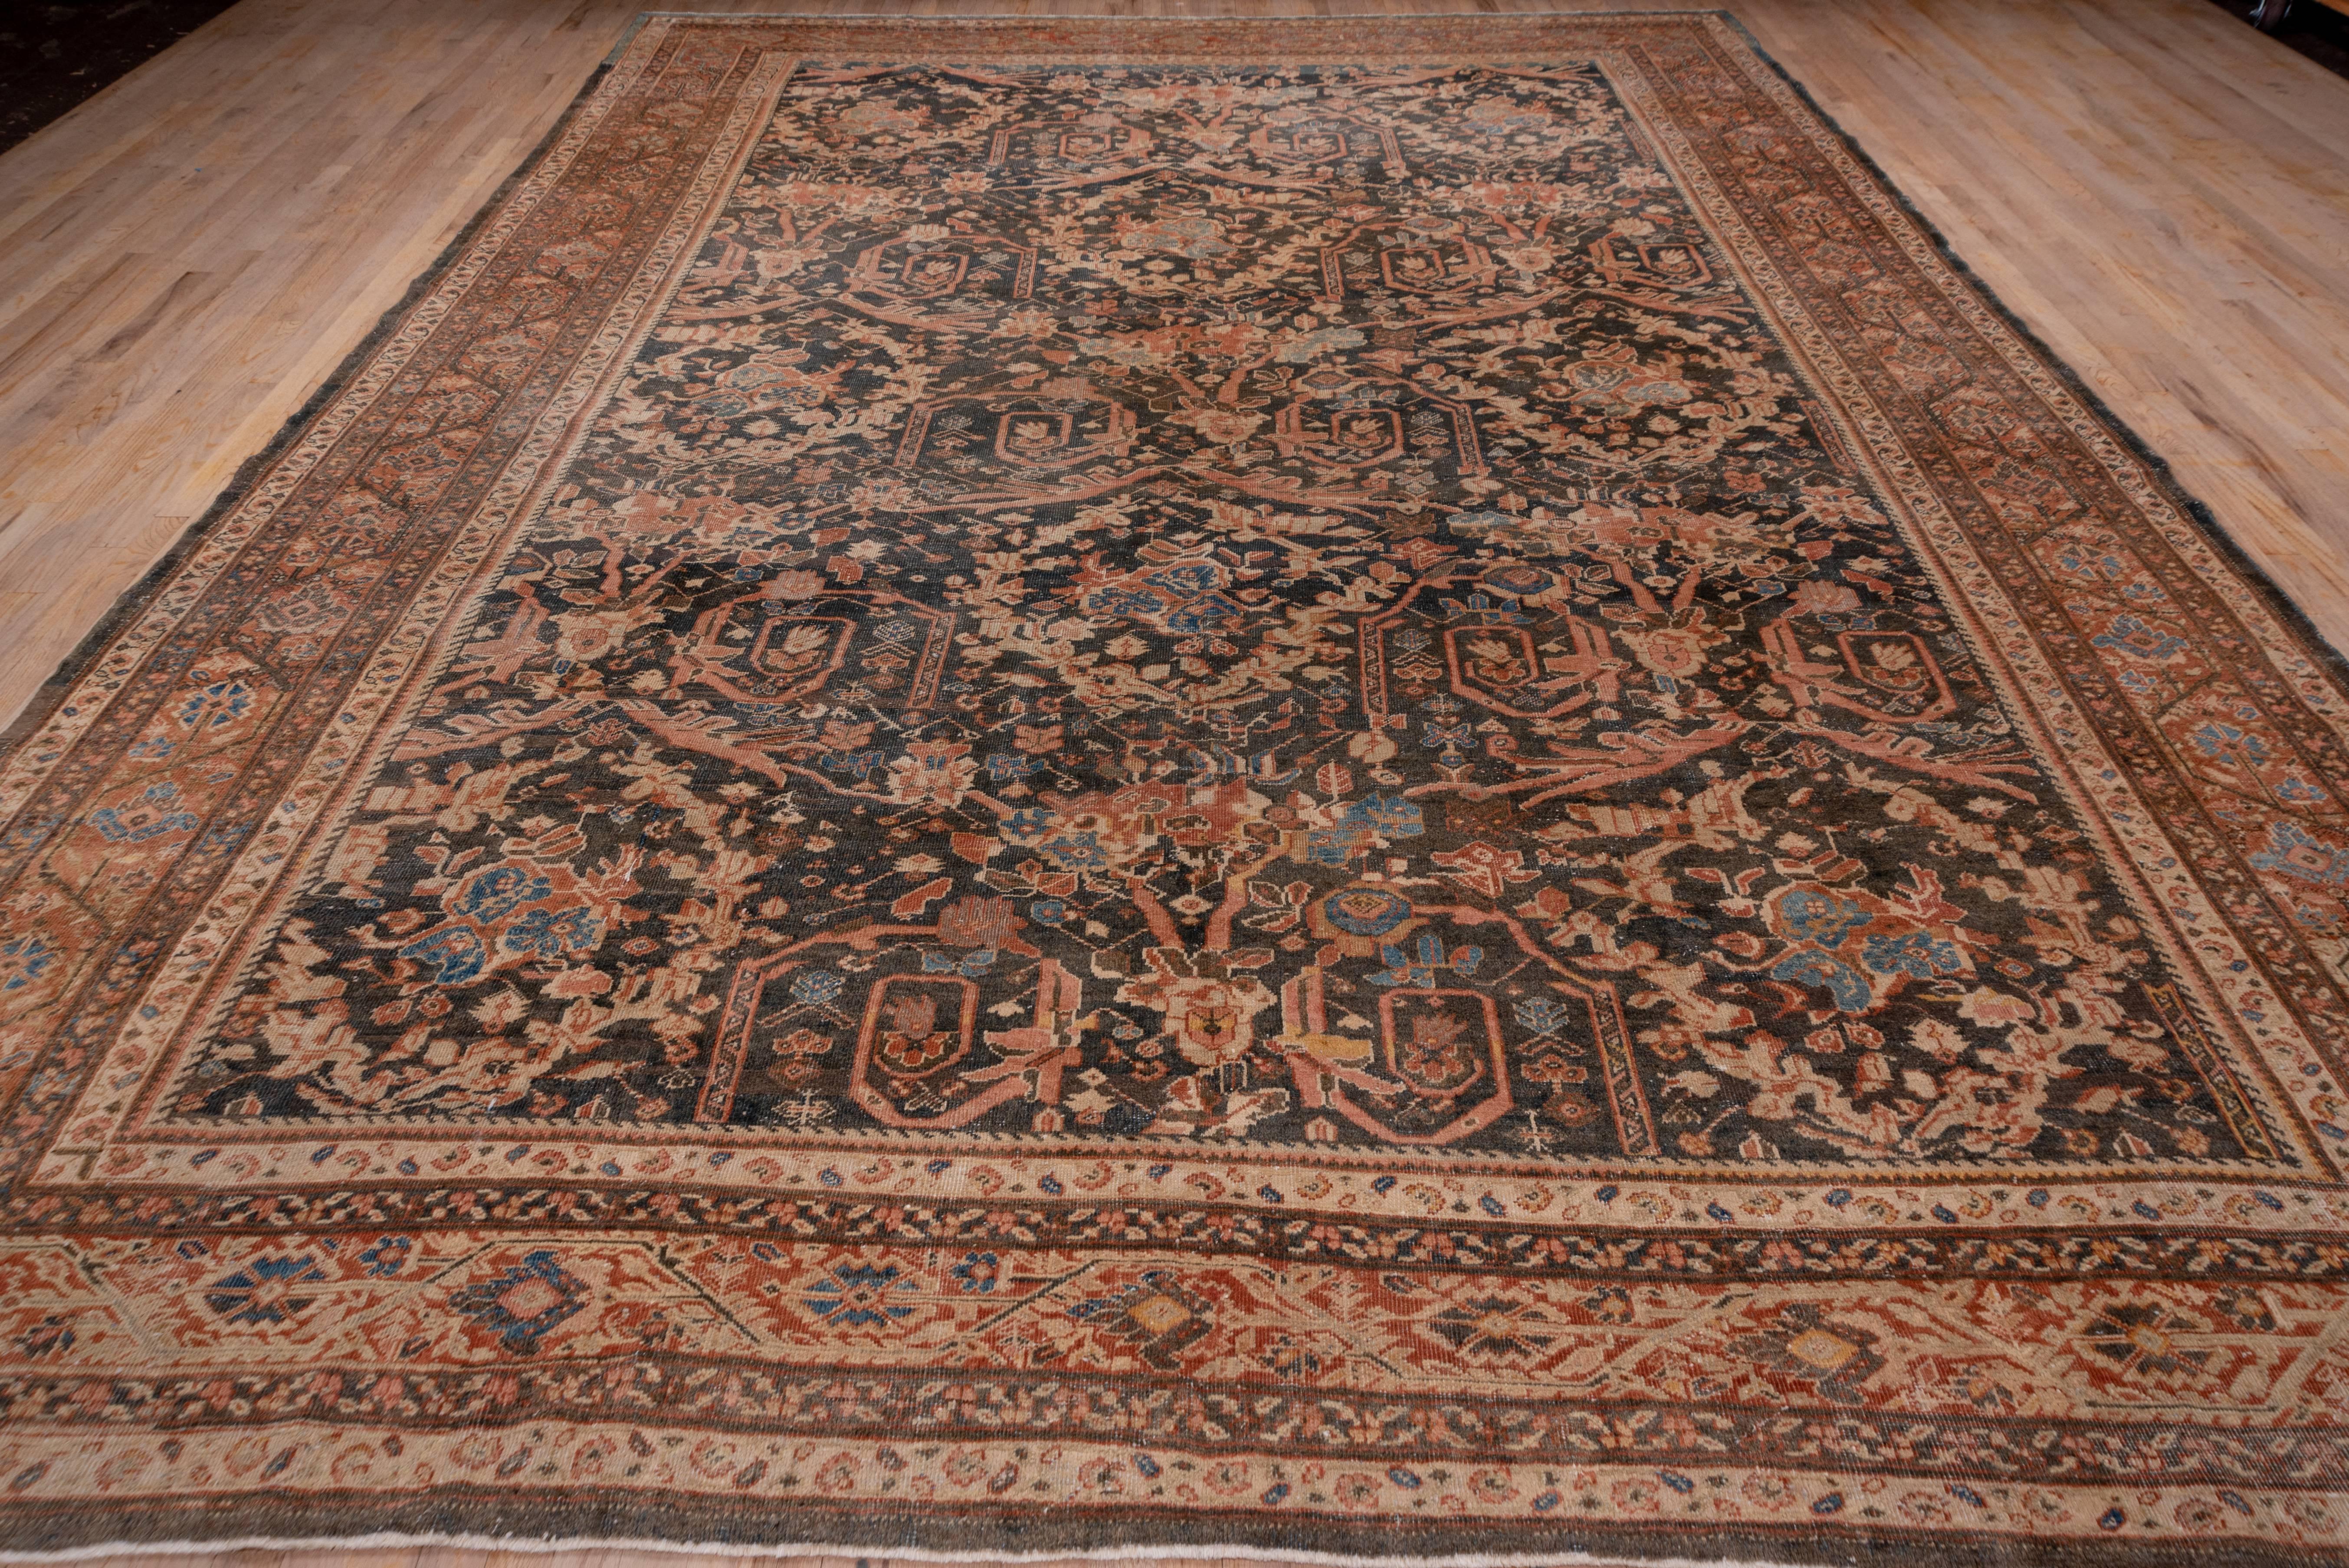 The olive brown field of this antique west Persian carpet has a Mustafi design of wound up leaves, broken acanthus wreaths and European palmettes. The light brown abrashed border displays a characteristic Arak province design of an angular vine